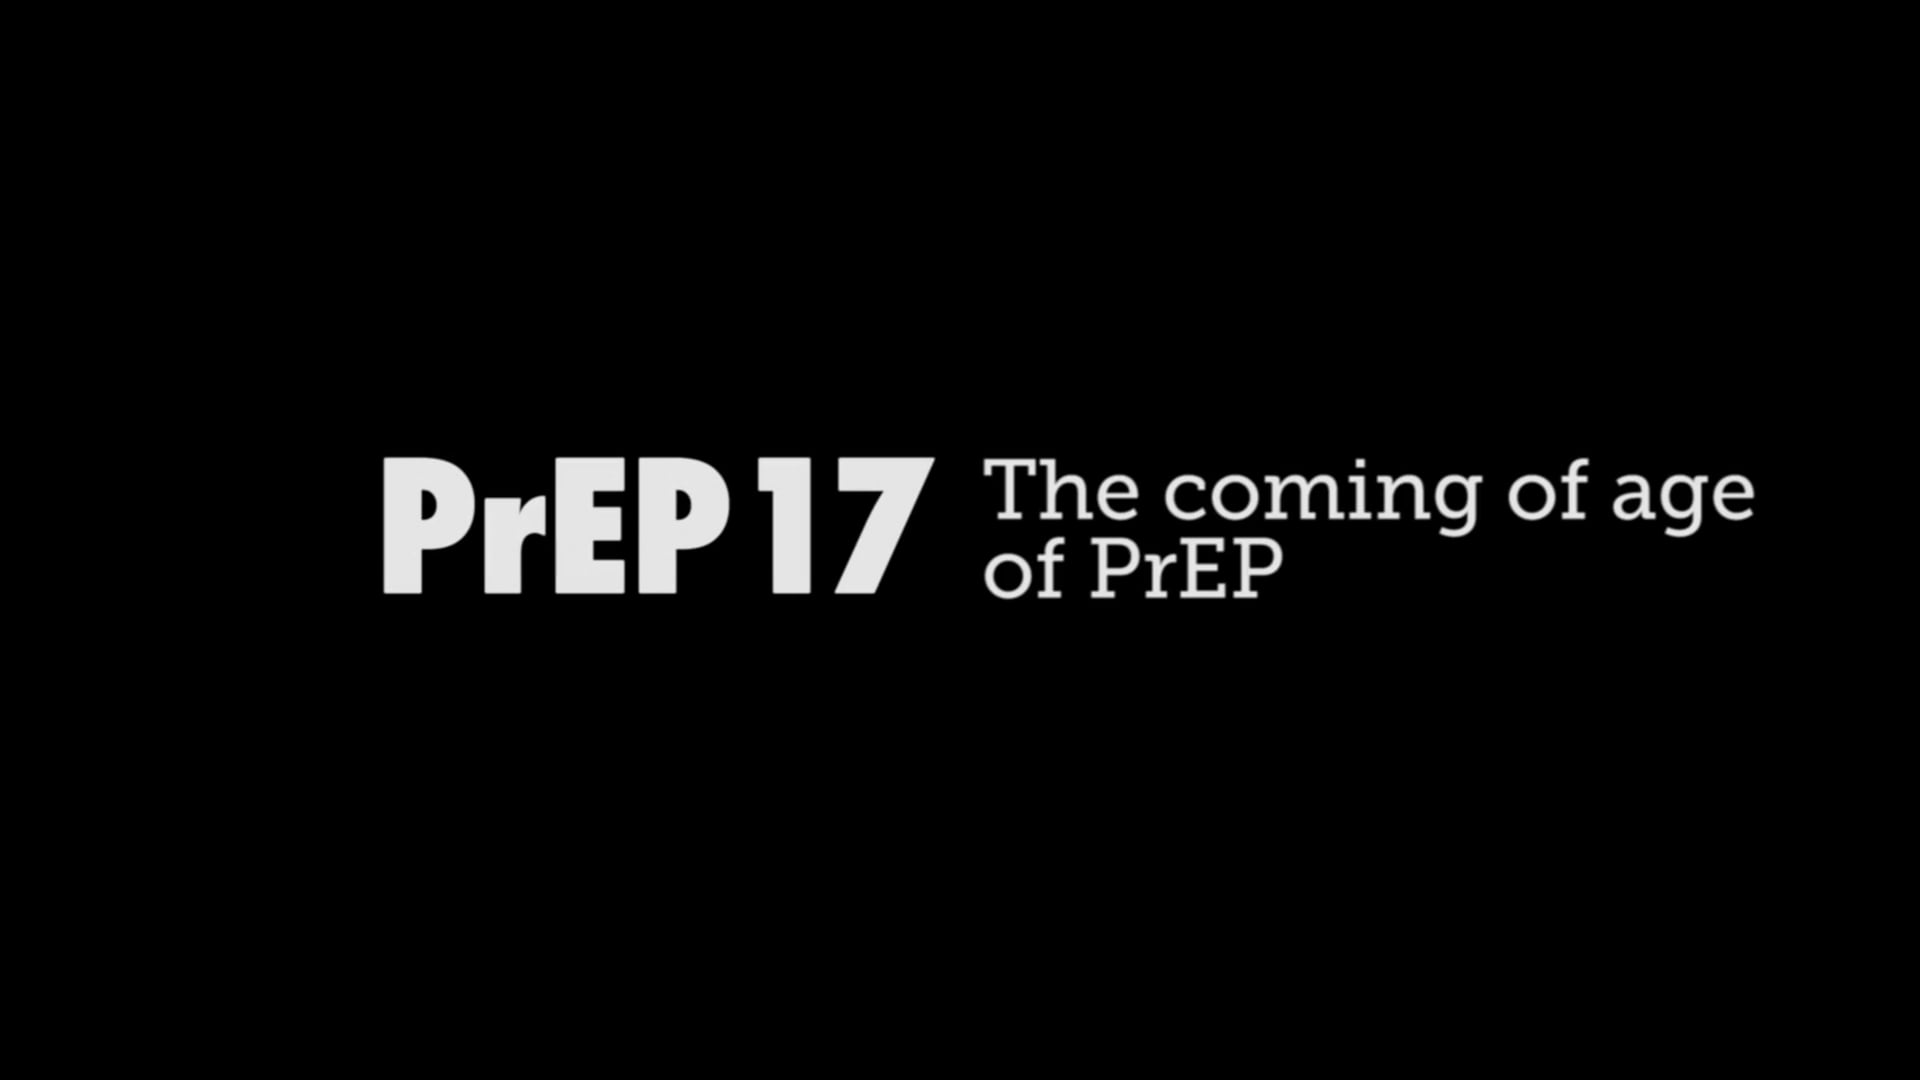 PrEP17 - The coming of age of PrEP